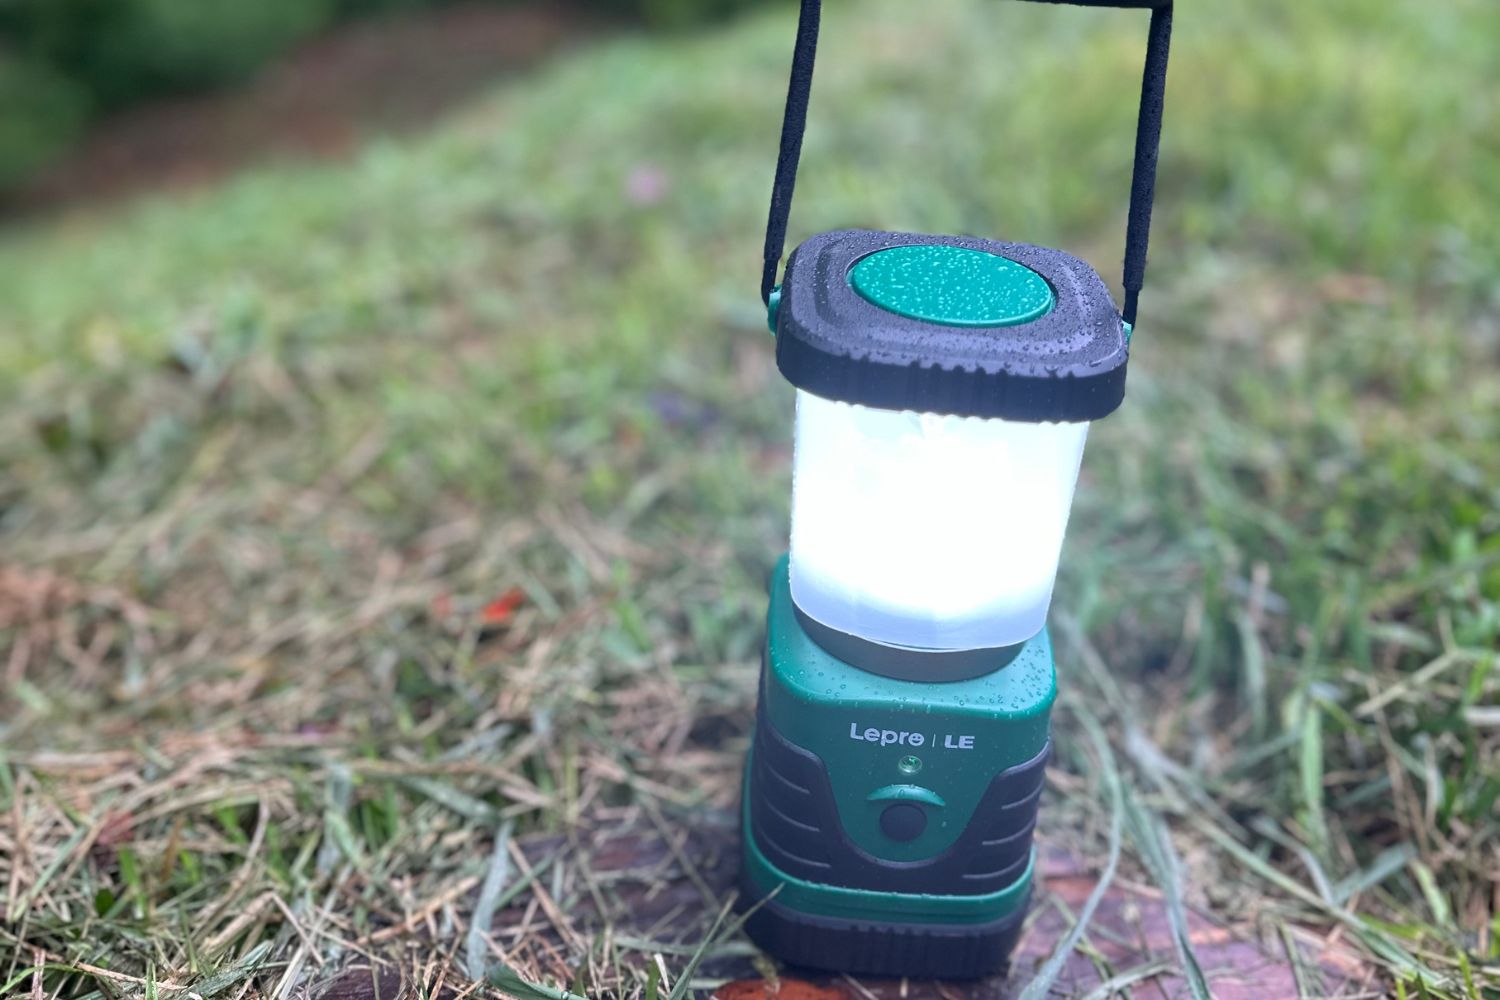 The Lepro LED lantern on a grassy spot in the woods